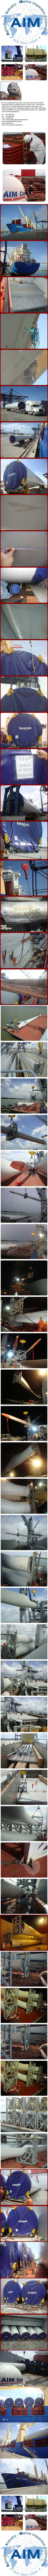 Supercargo_loading_survey_lashing_securing_inspection_Asia_Global_AIM_Control